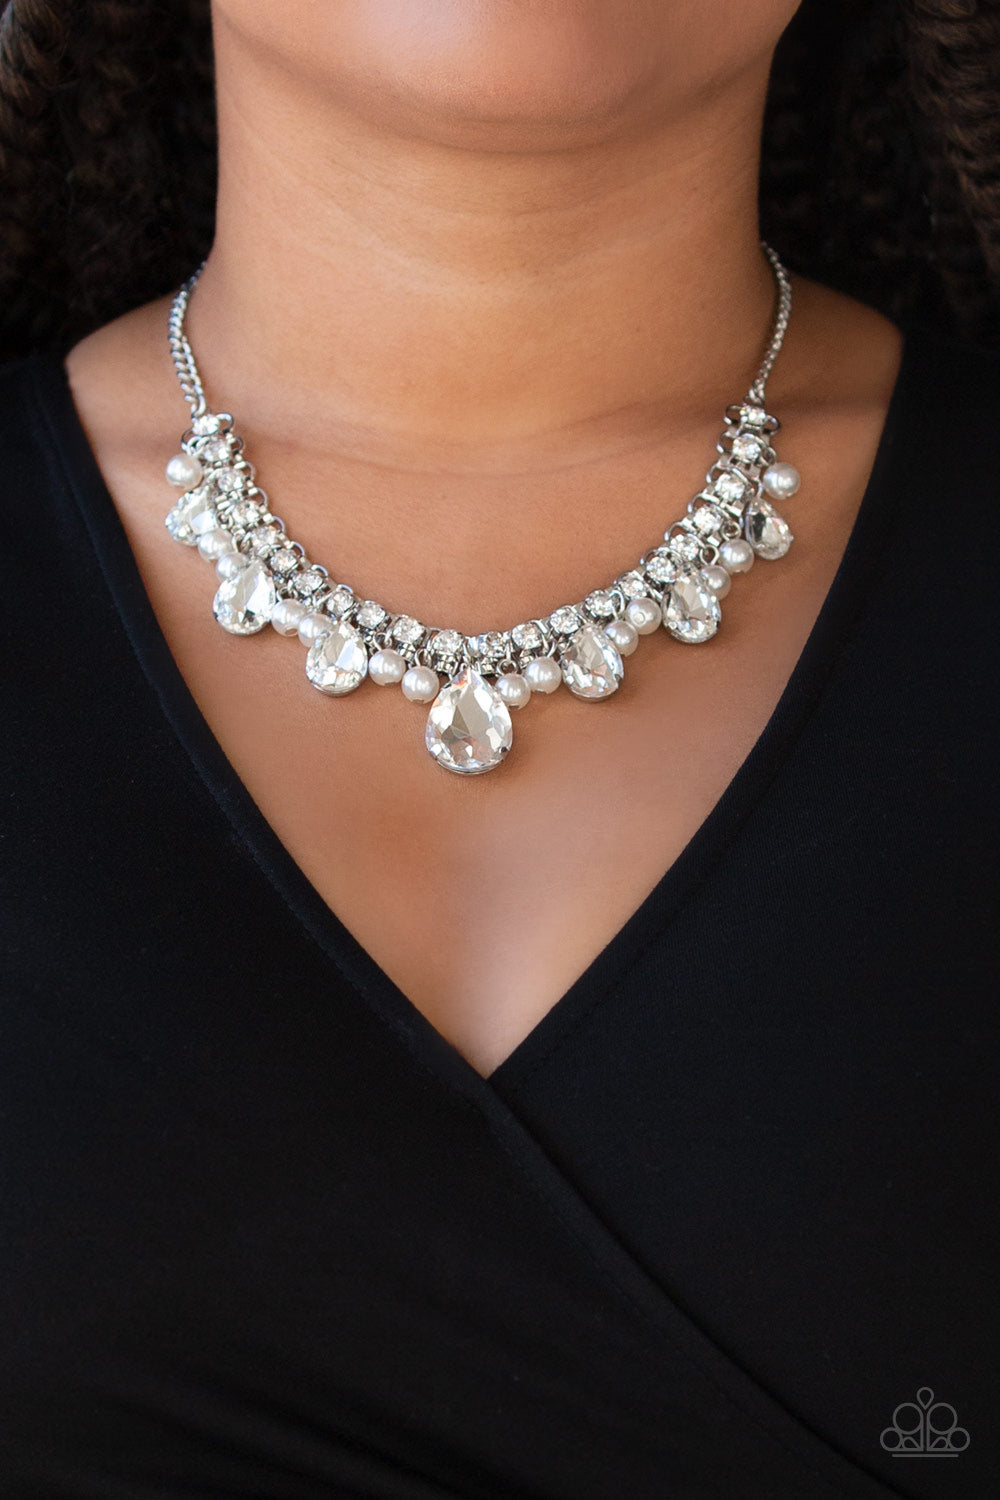 Knockout Queen - White - Paparazzi necklace